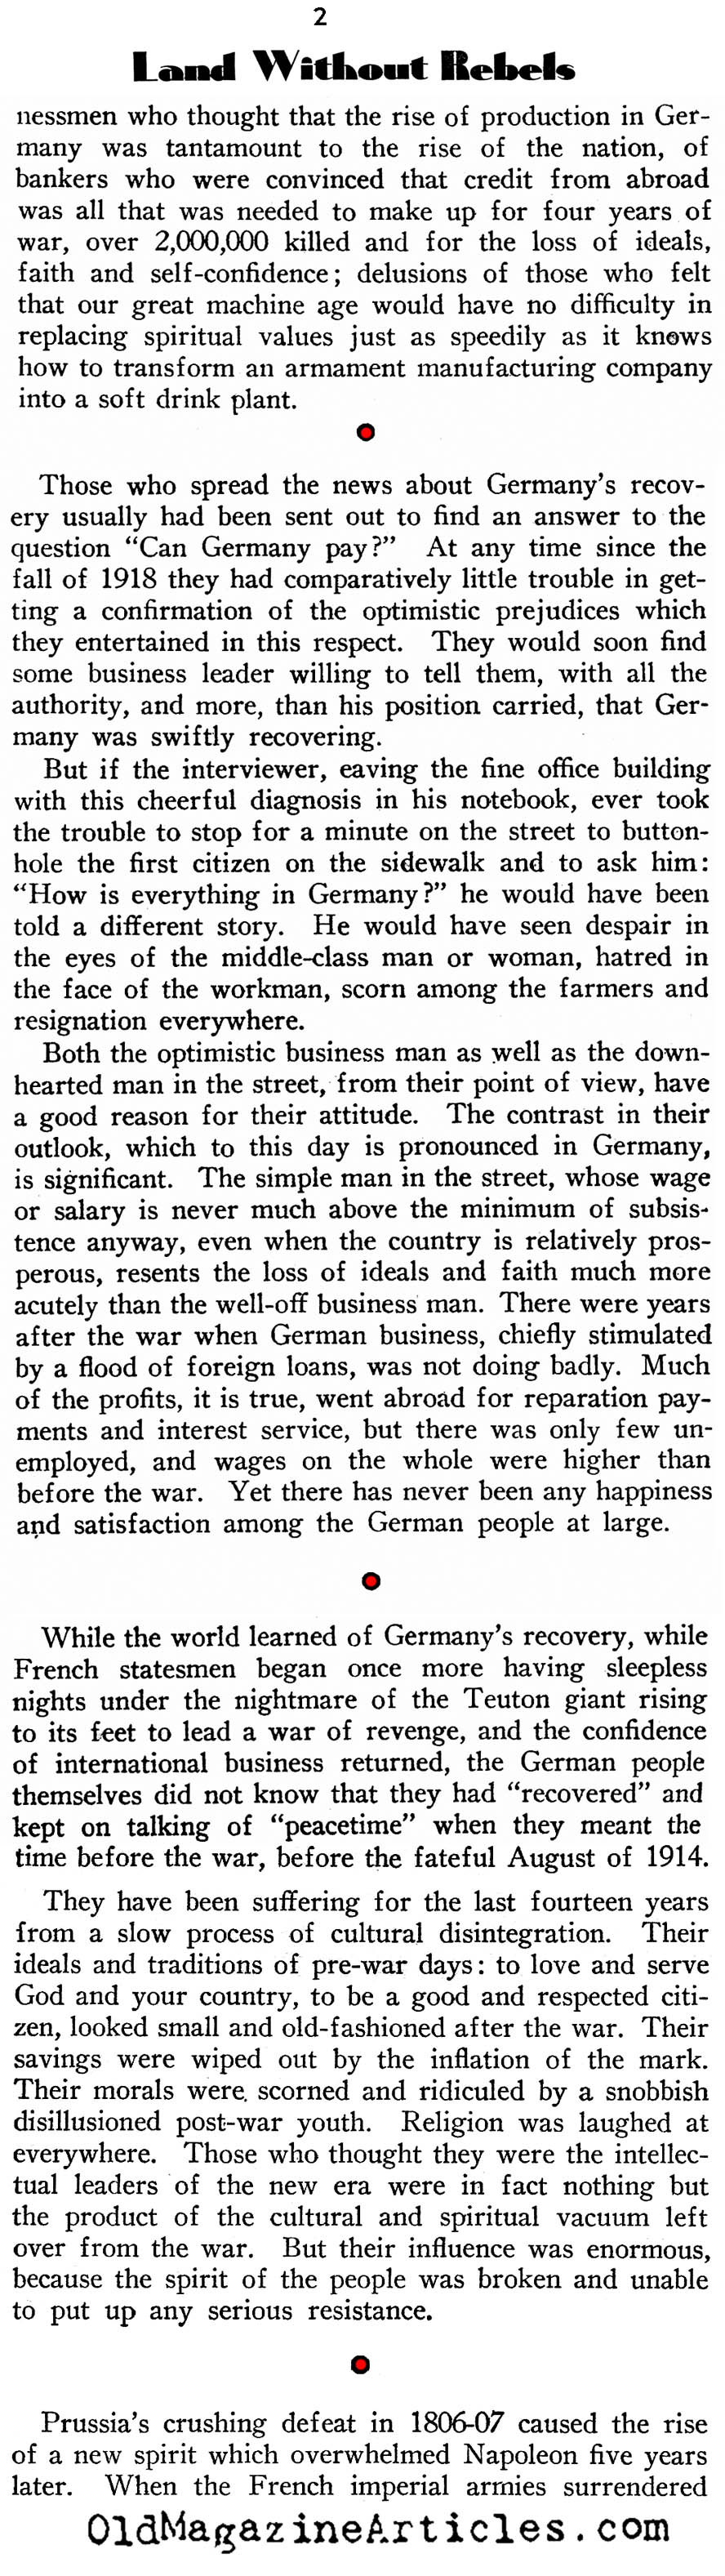 Germany on the Eve of Hitler (New Outlook Magazine, 1933)